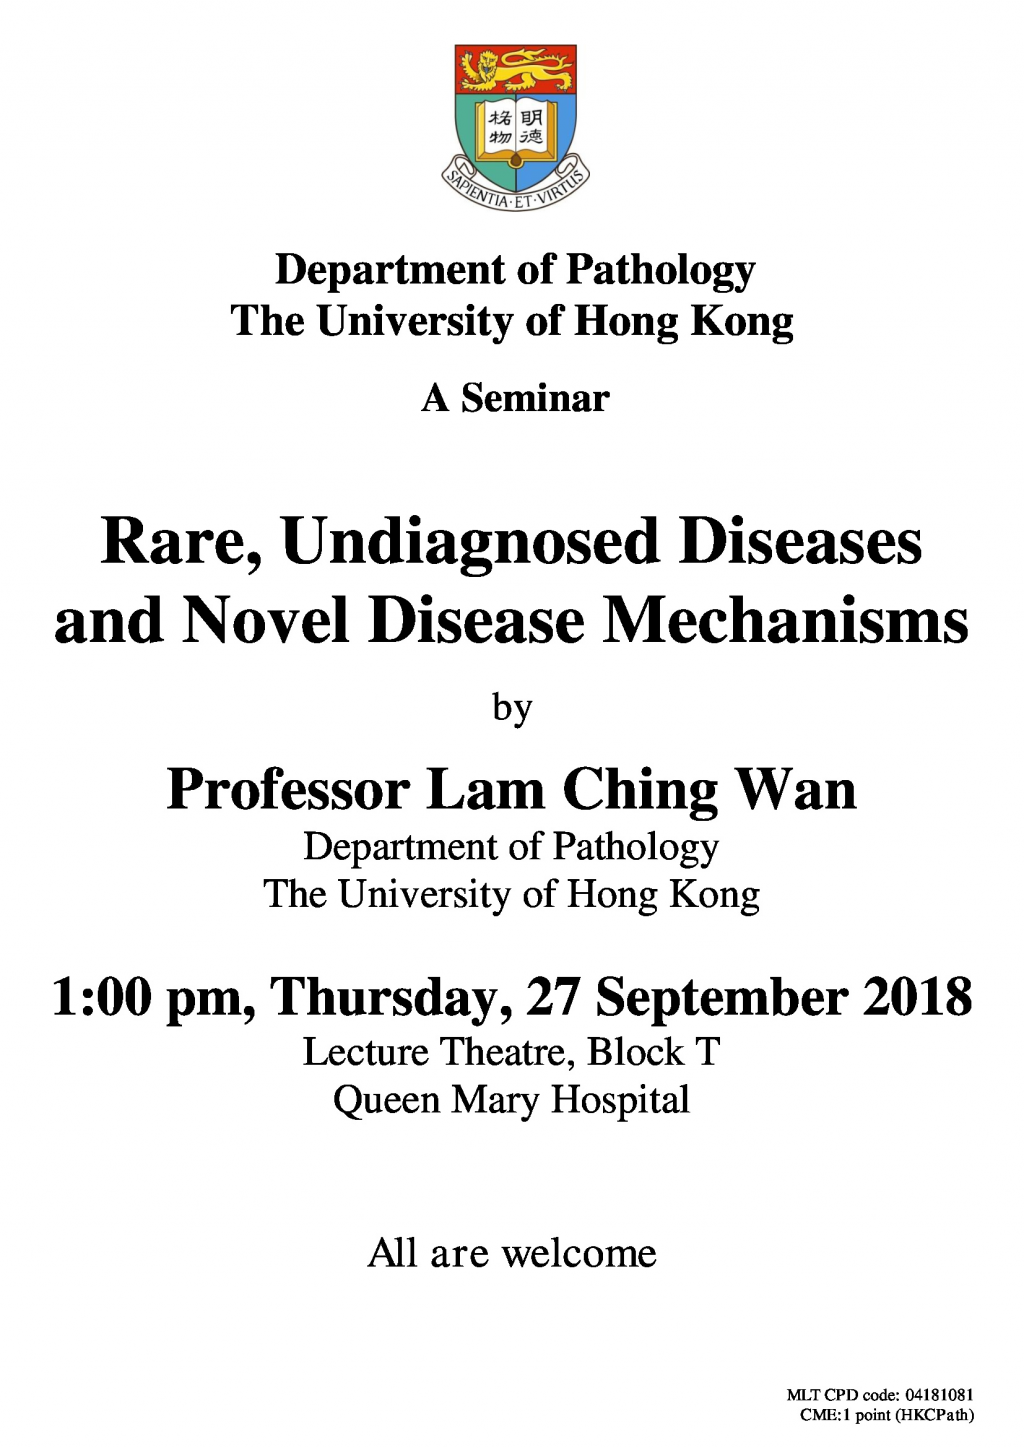 A Seminar by Professor Lam Ching Wan on Sept 27 (1 pm)